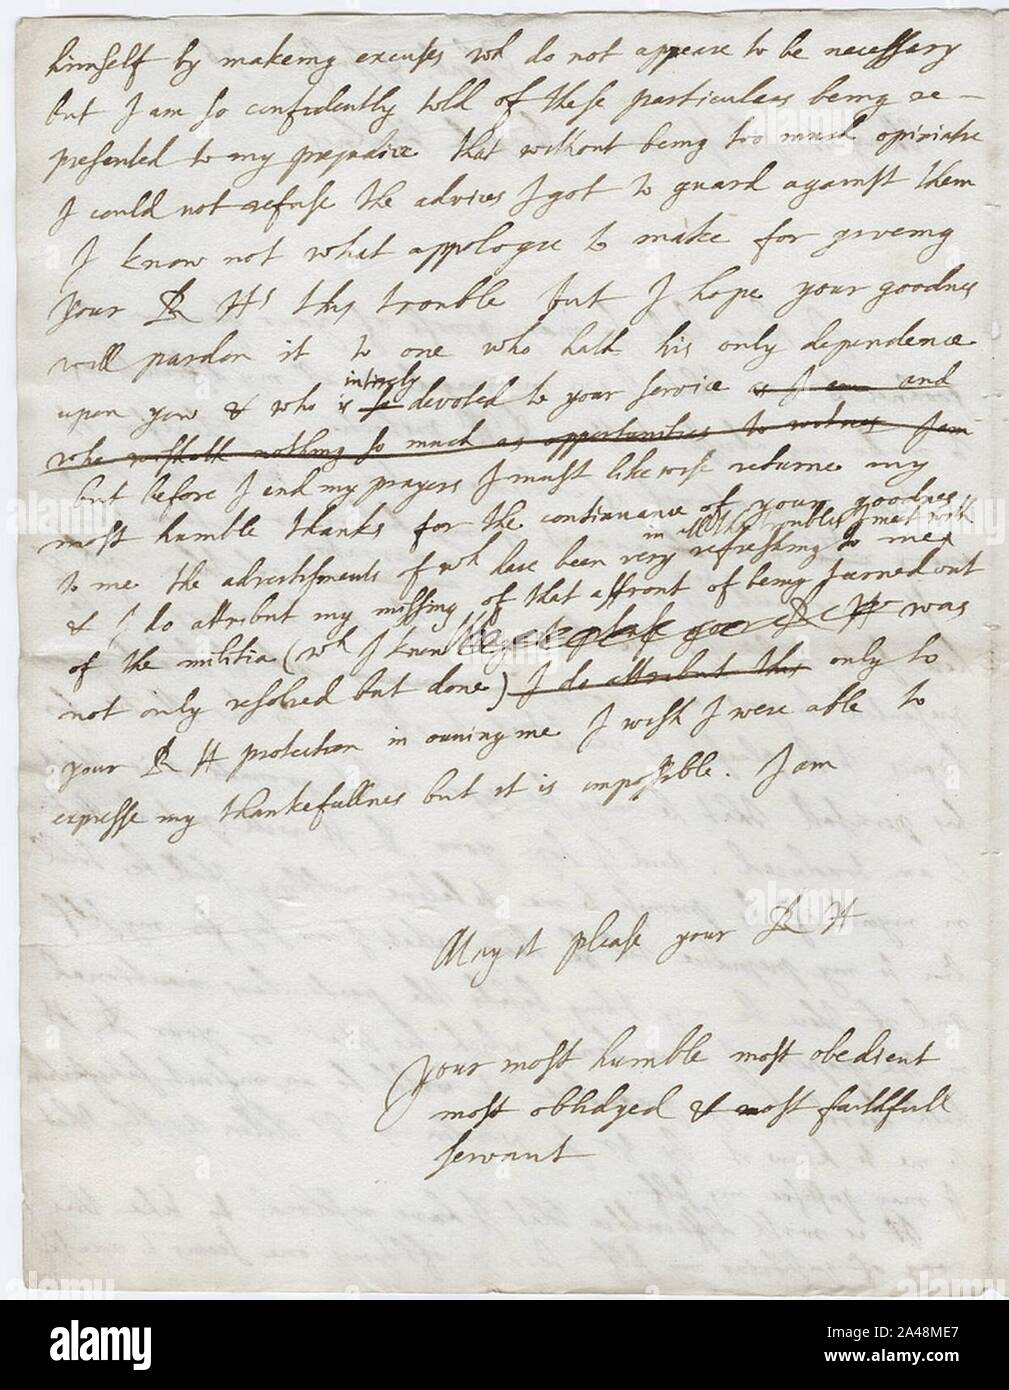 Beinecke Flickr Laboratory - (Letter addressed to) your Royale Highness, 1676 July 8, Edinburgh. Stock Photo